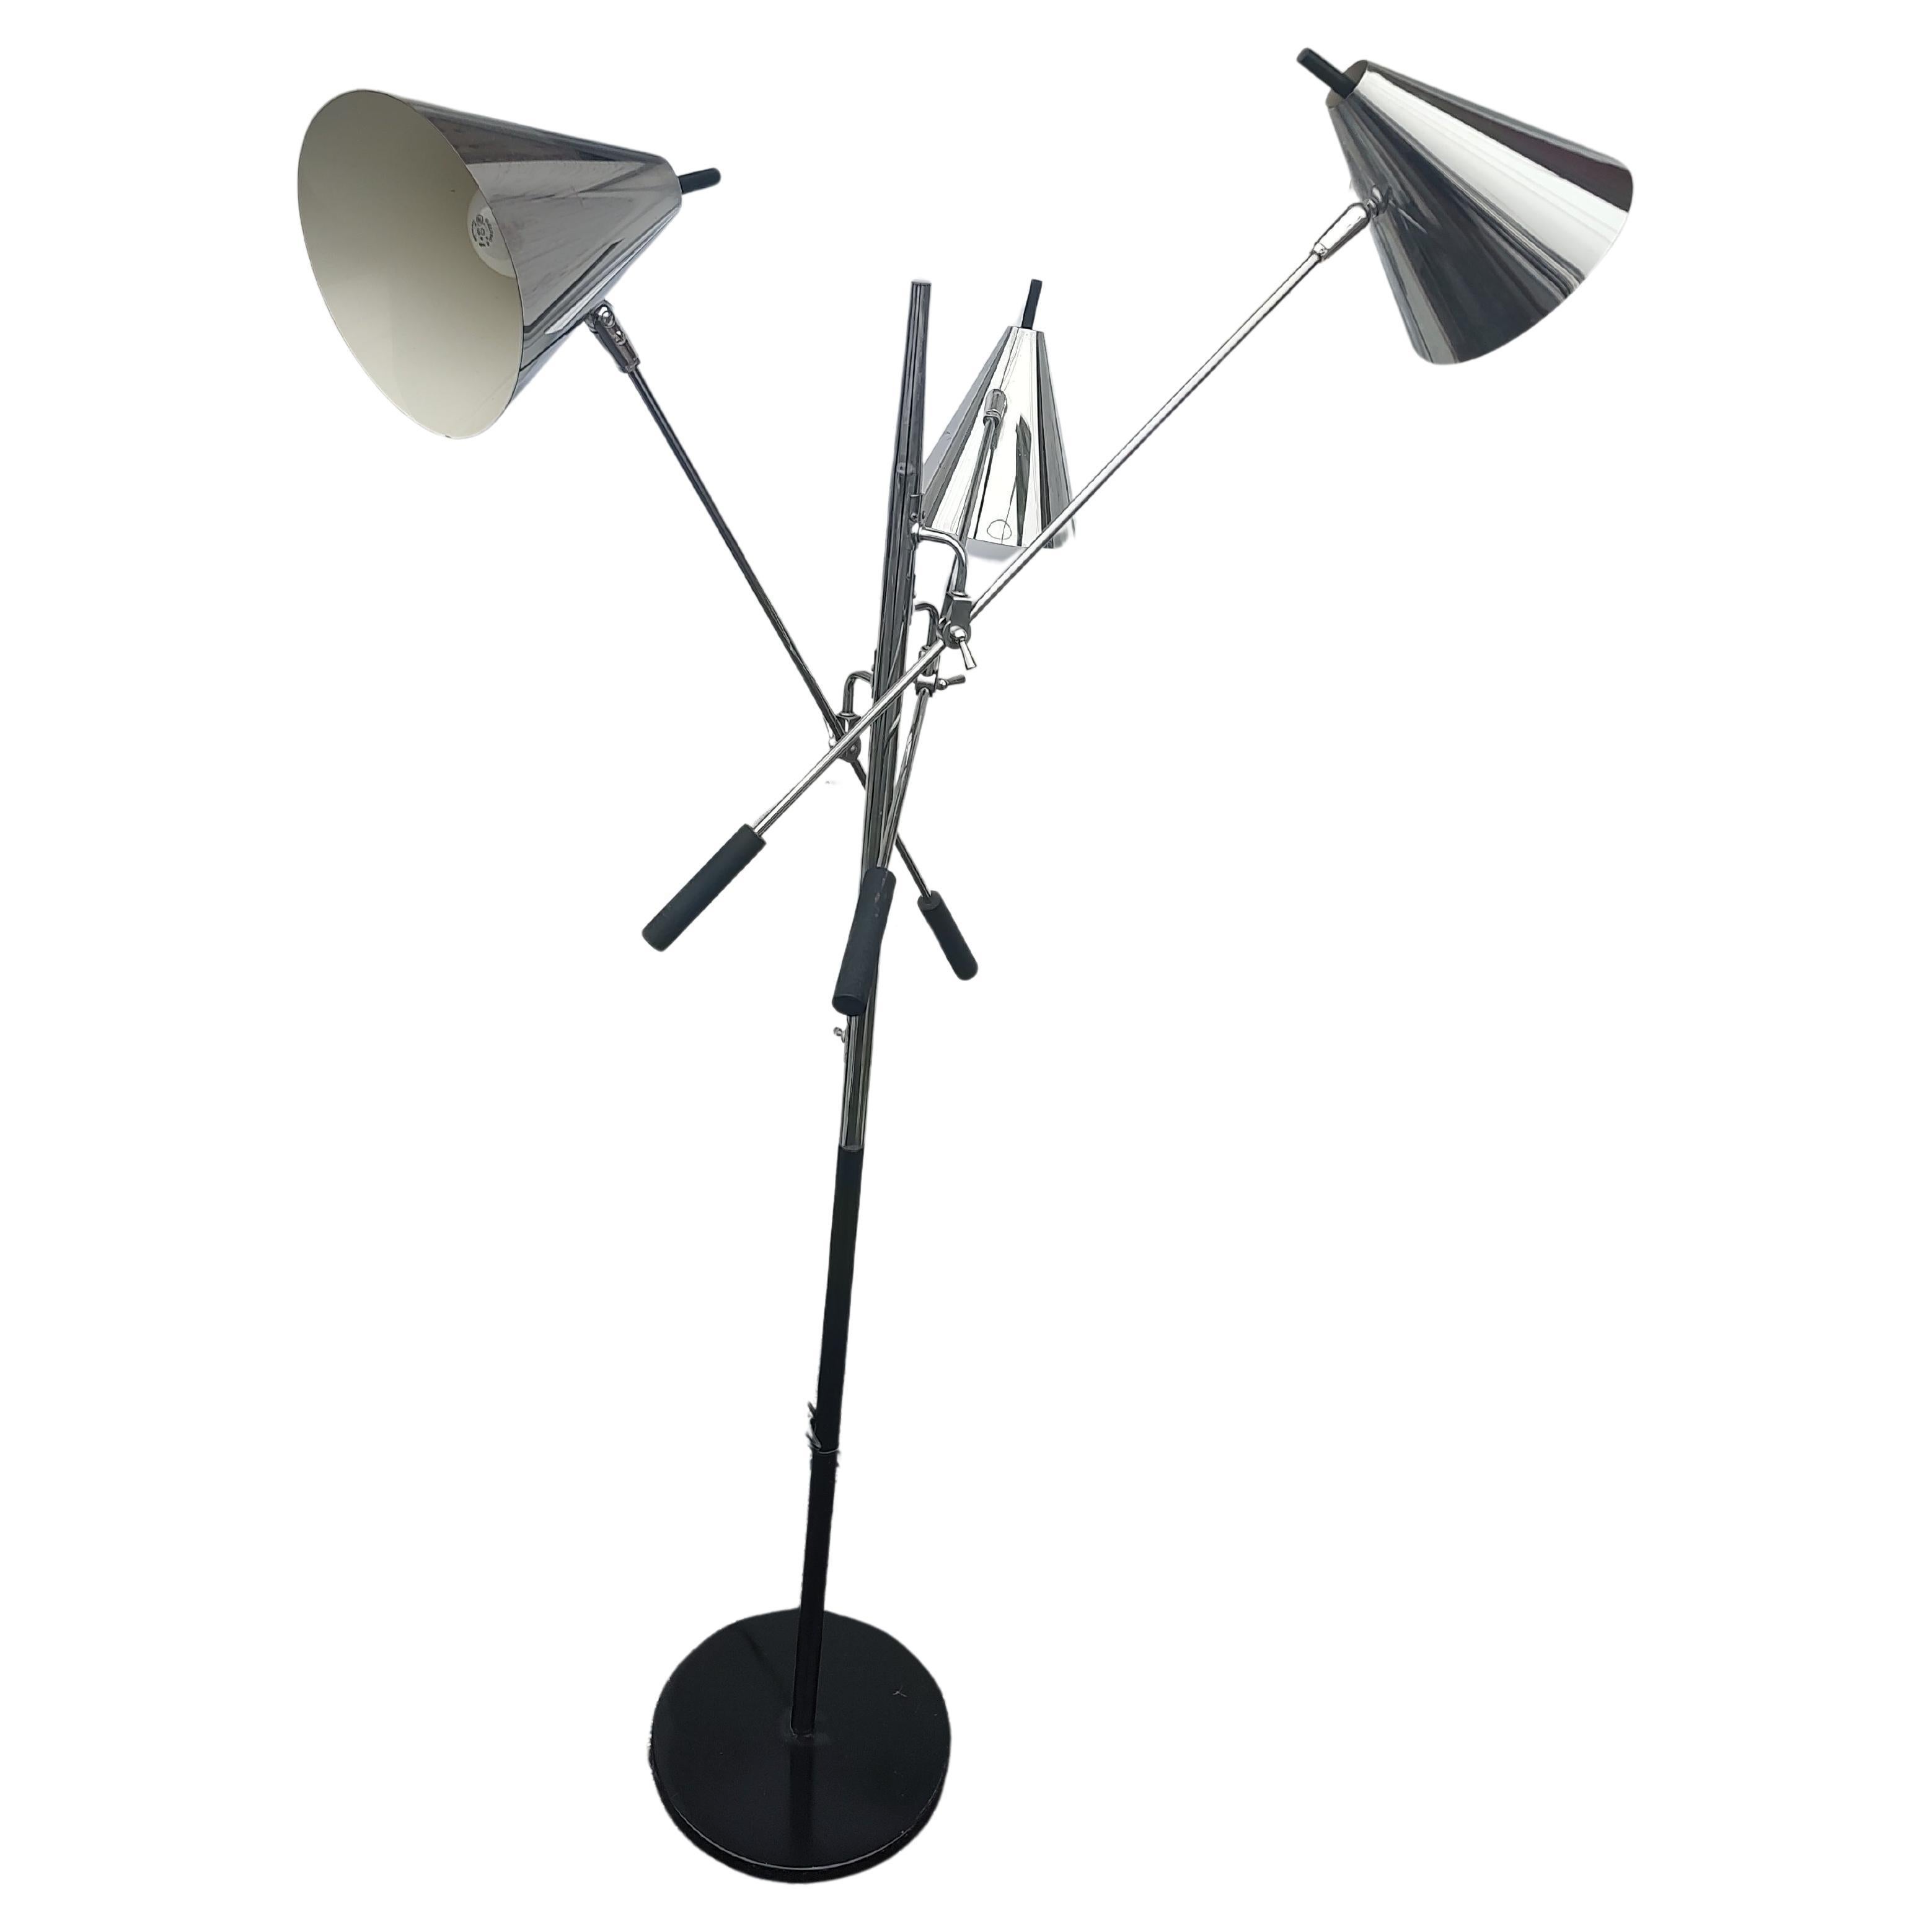 Polished Mid Century Modern Sculptural Triennial Floor Lamp Attributed to Gino Sarfatti For Sale